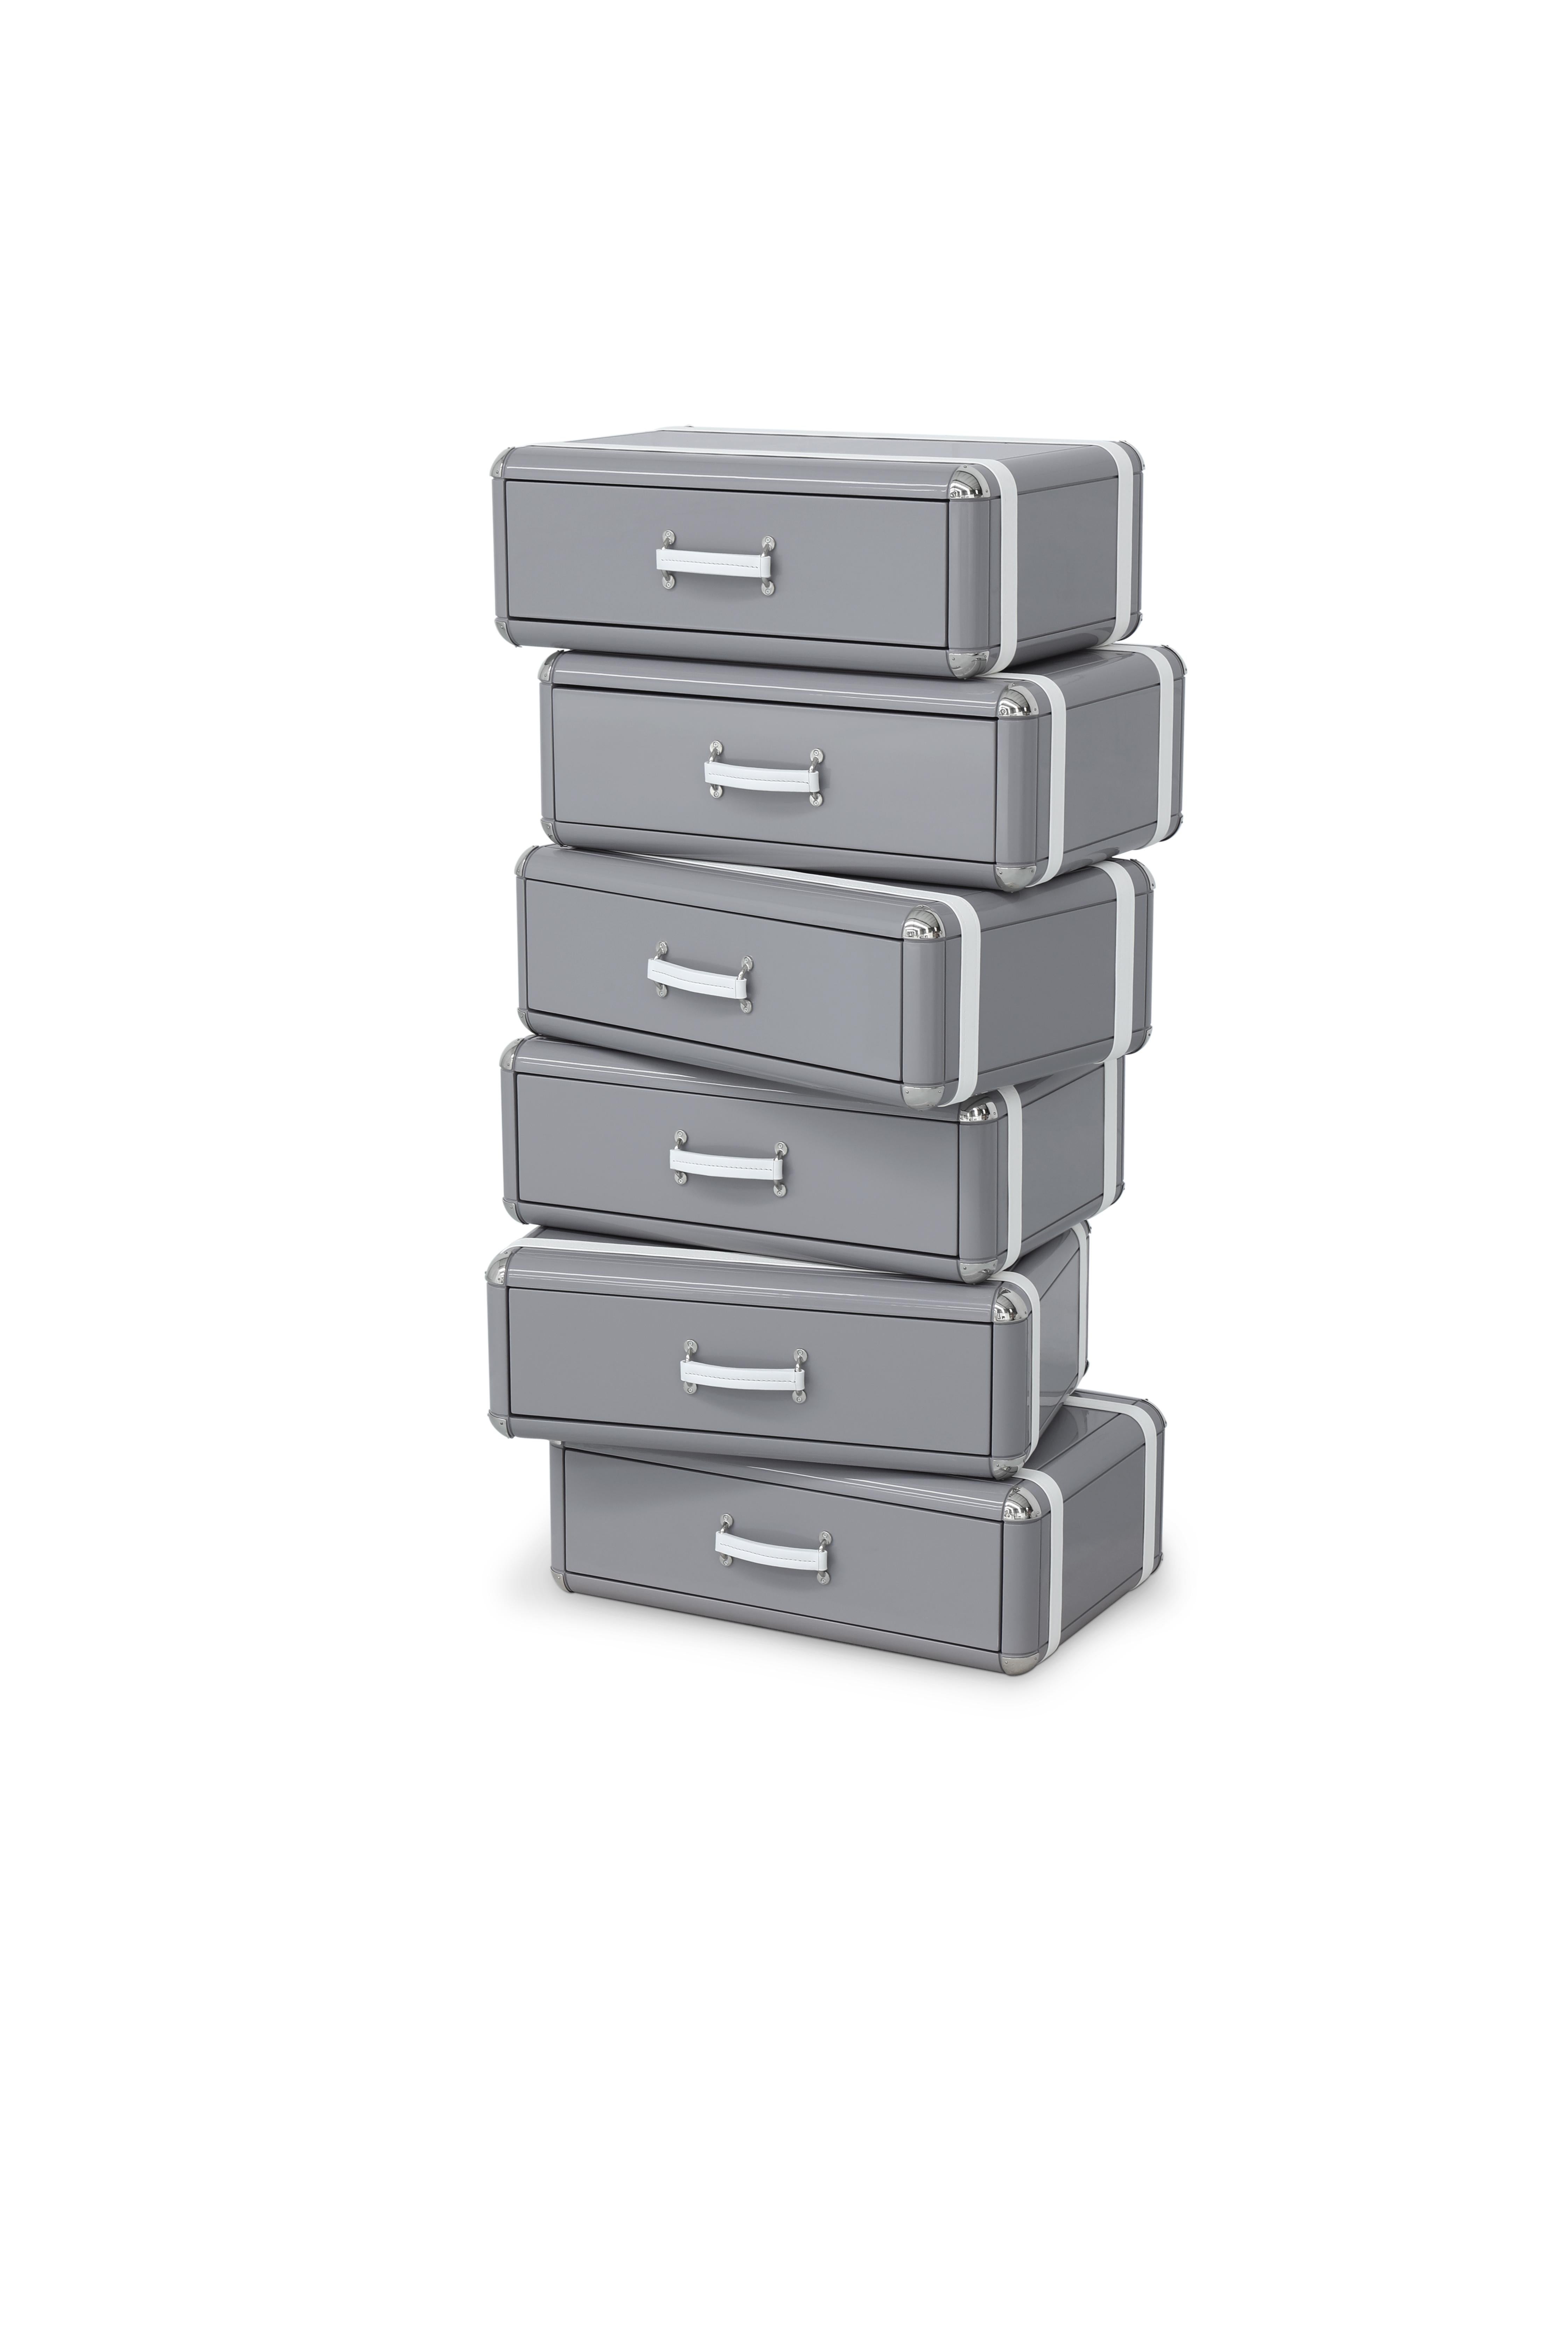 Sky Six-Drawers Kids Chest with Gray Lacquered Finish by Circu Magical Furniture

The Sky Chest is a kids’ chest of drawers inspired by the Disney movie “Planes” and it is the perfect storage item for your aviation-inspired bedroom decoration. With